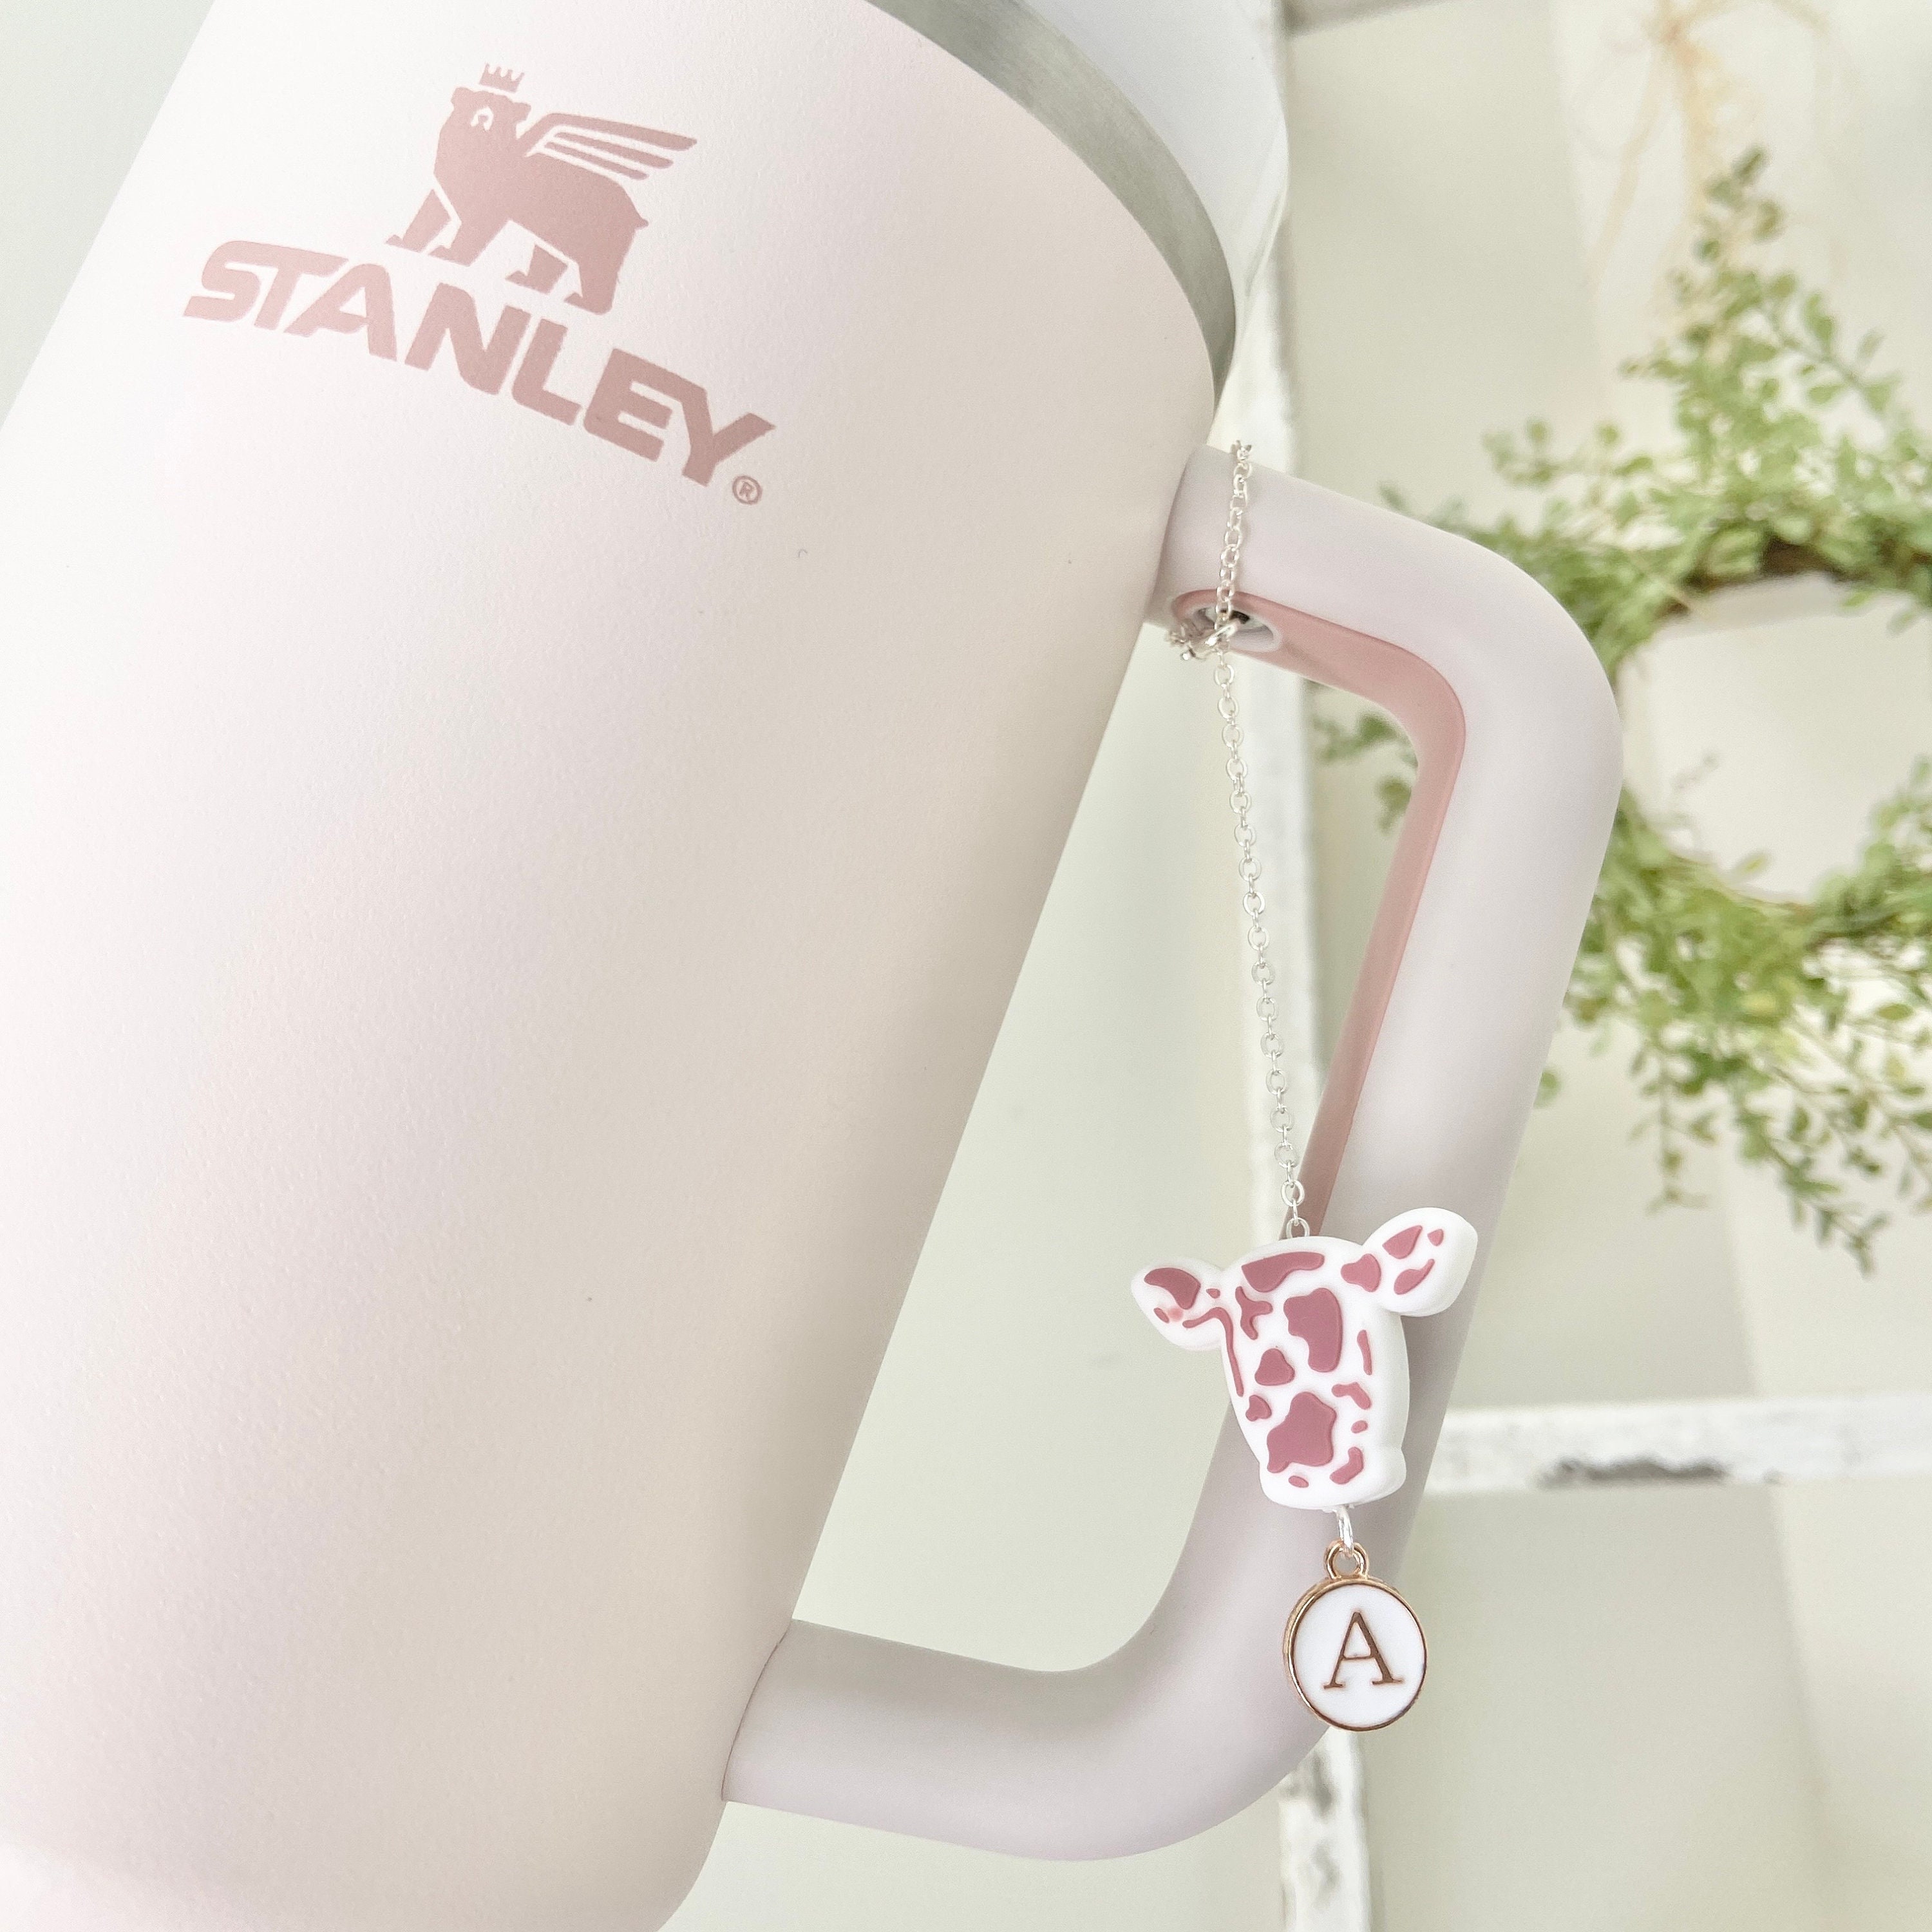 Stanley Tumbler Charm Journal Accessories Clay Stanley Cup Charm Clay Charm  Tumbler Charm Tumbler Handle Confetti 